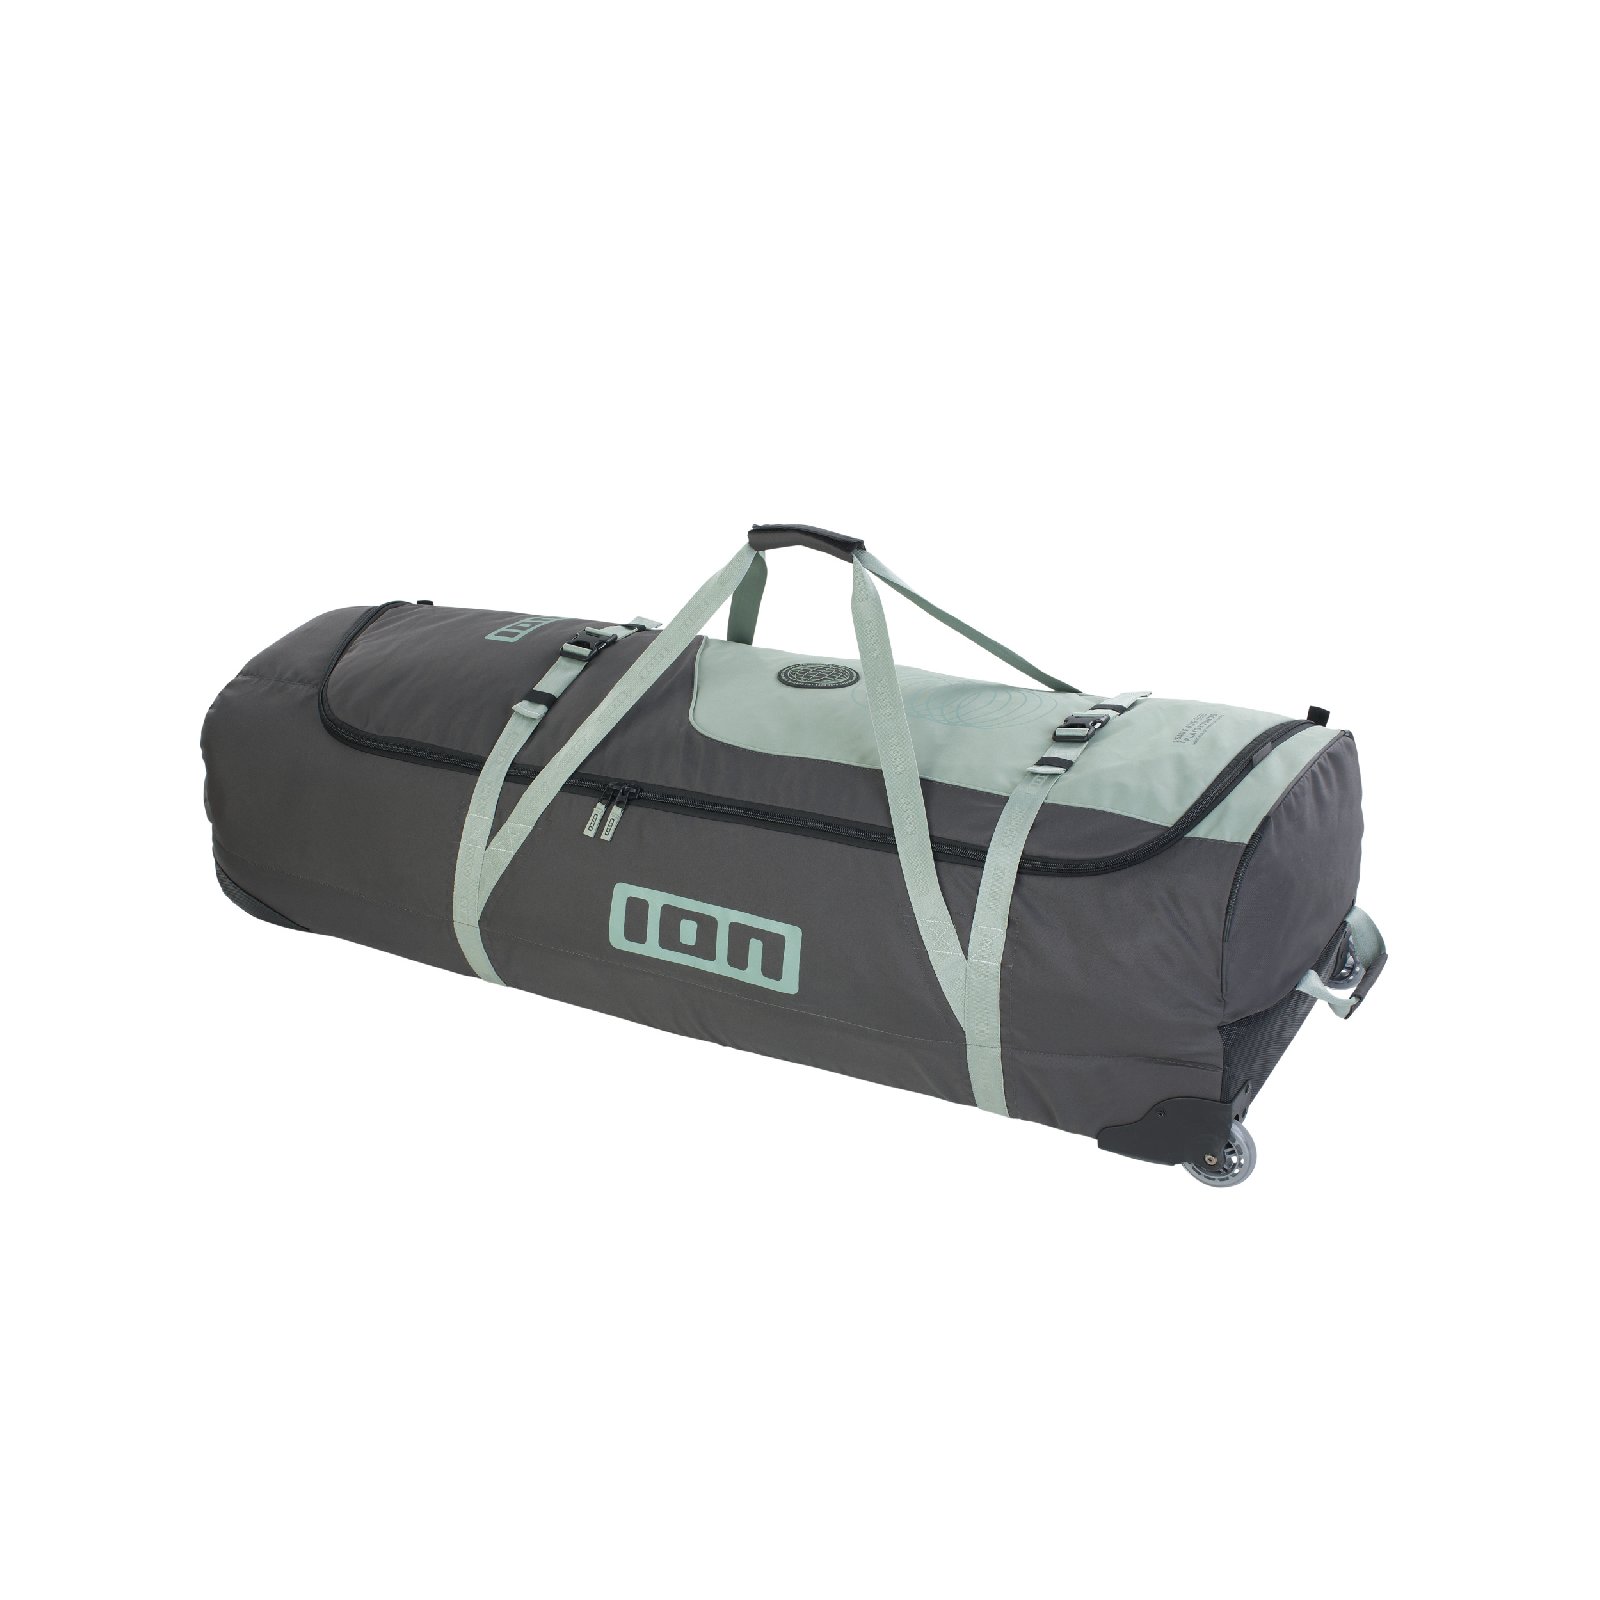 ION  / Gearbag Core   139 (48230-7018) . 23-